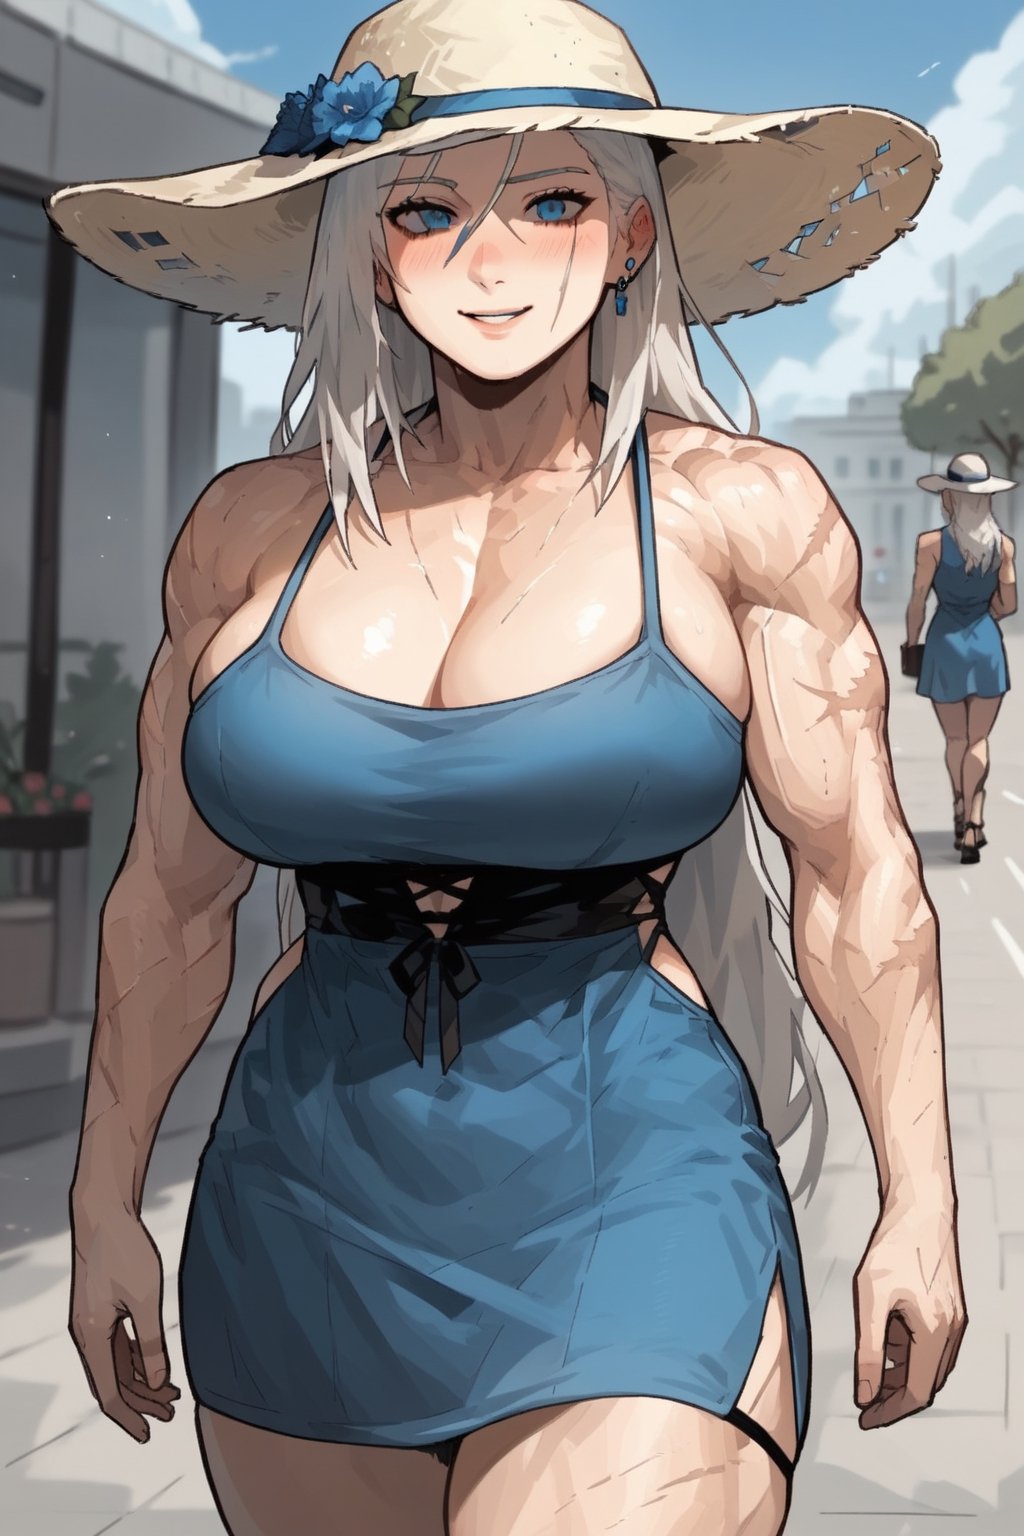 score_9, score_8, score_7, pov(male, human) walking hand in hand with wife(toned muscles, feminine, wearing summer blue dress and hat, big breasts, long hair, white hair, blue eyes, scars, shy, blushing, smile), staring at you, lakeside